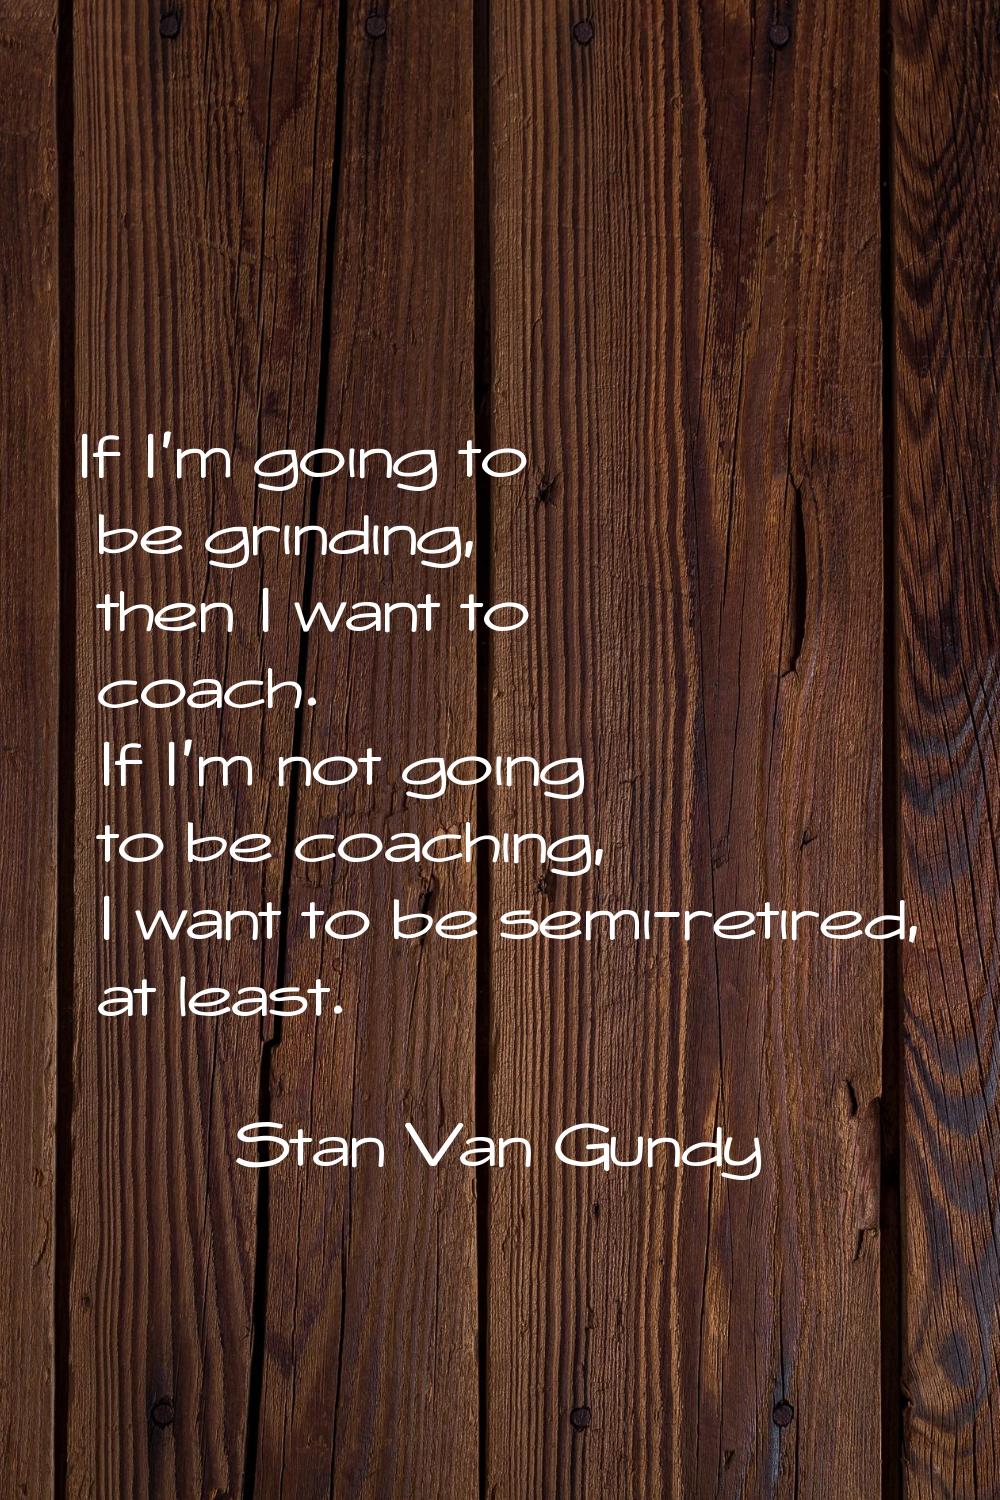 If I'm going to be grinding, then I want to coach. If I'm not going to be coaching, I want to be se